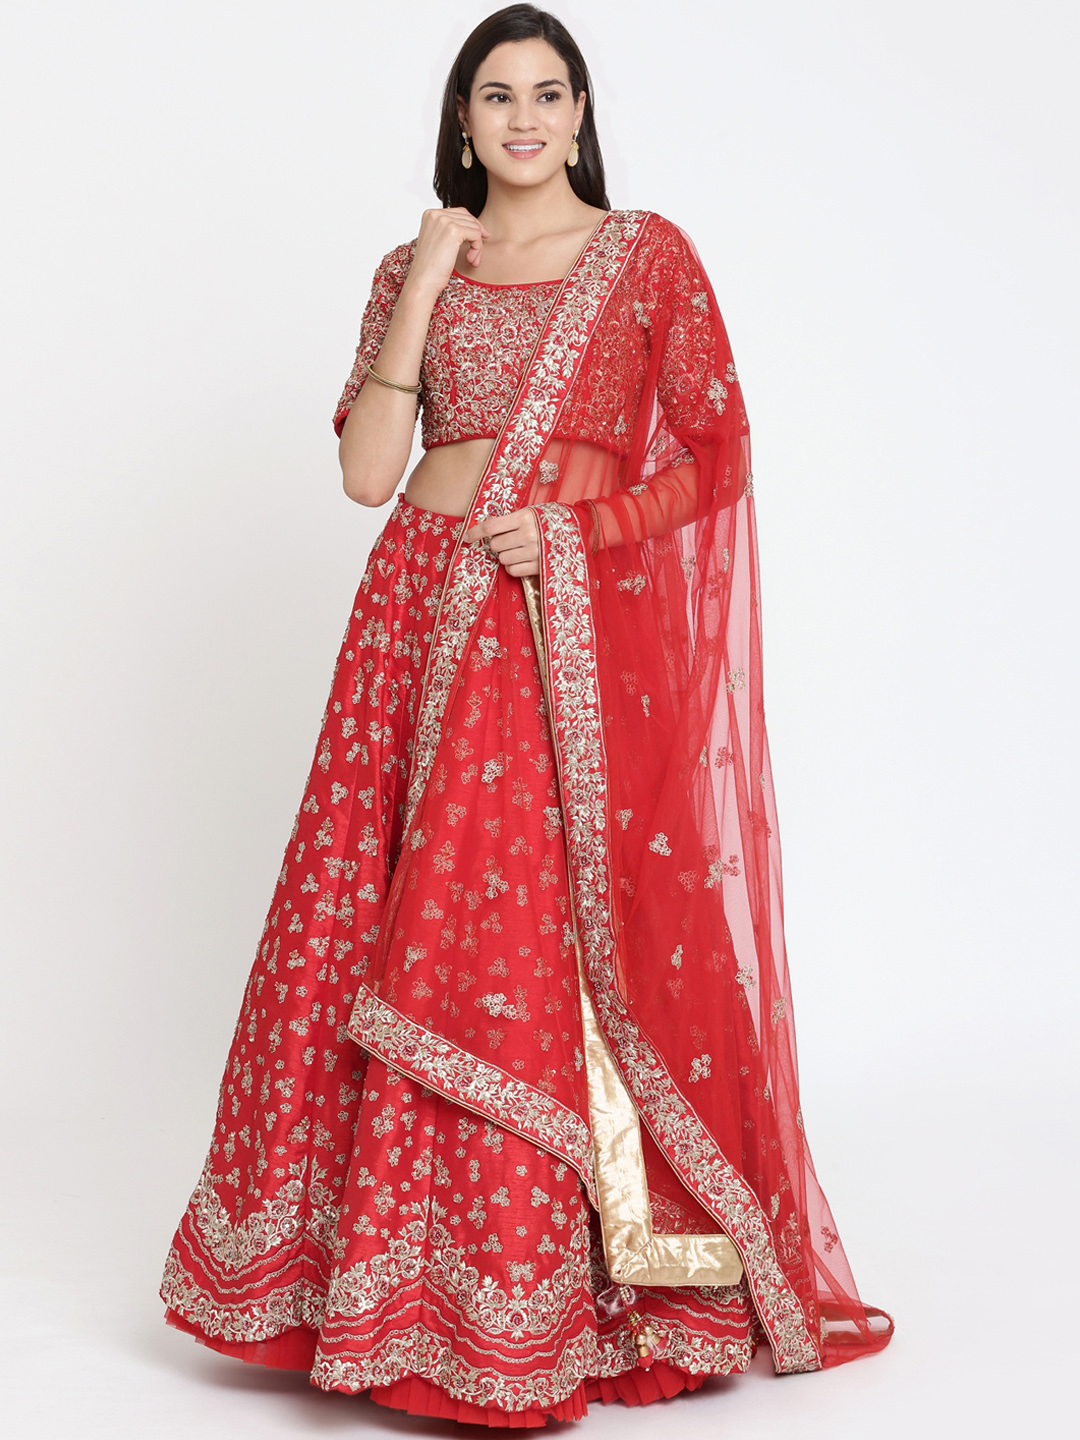 Koskii Red Ready to Wear Lehenga & Blouse with Dupatta Price in India